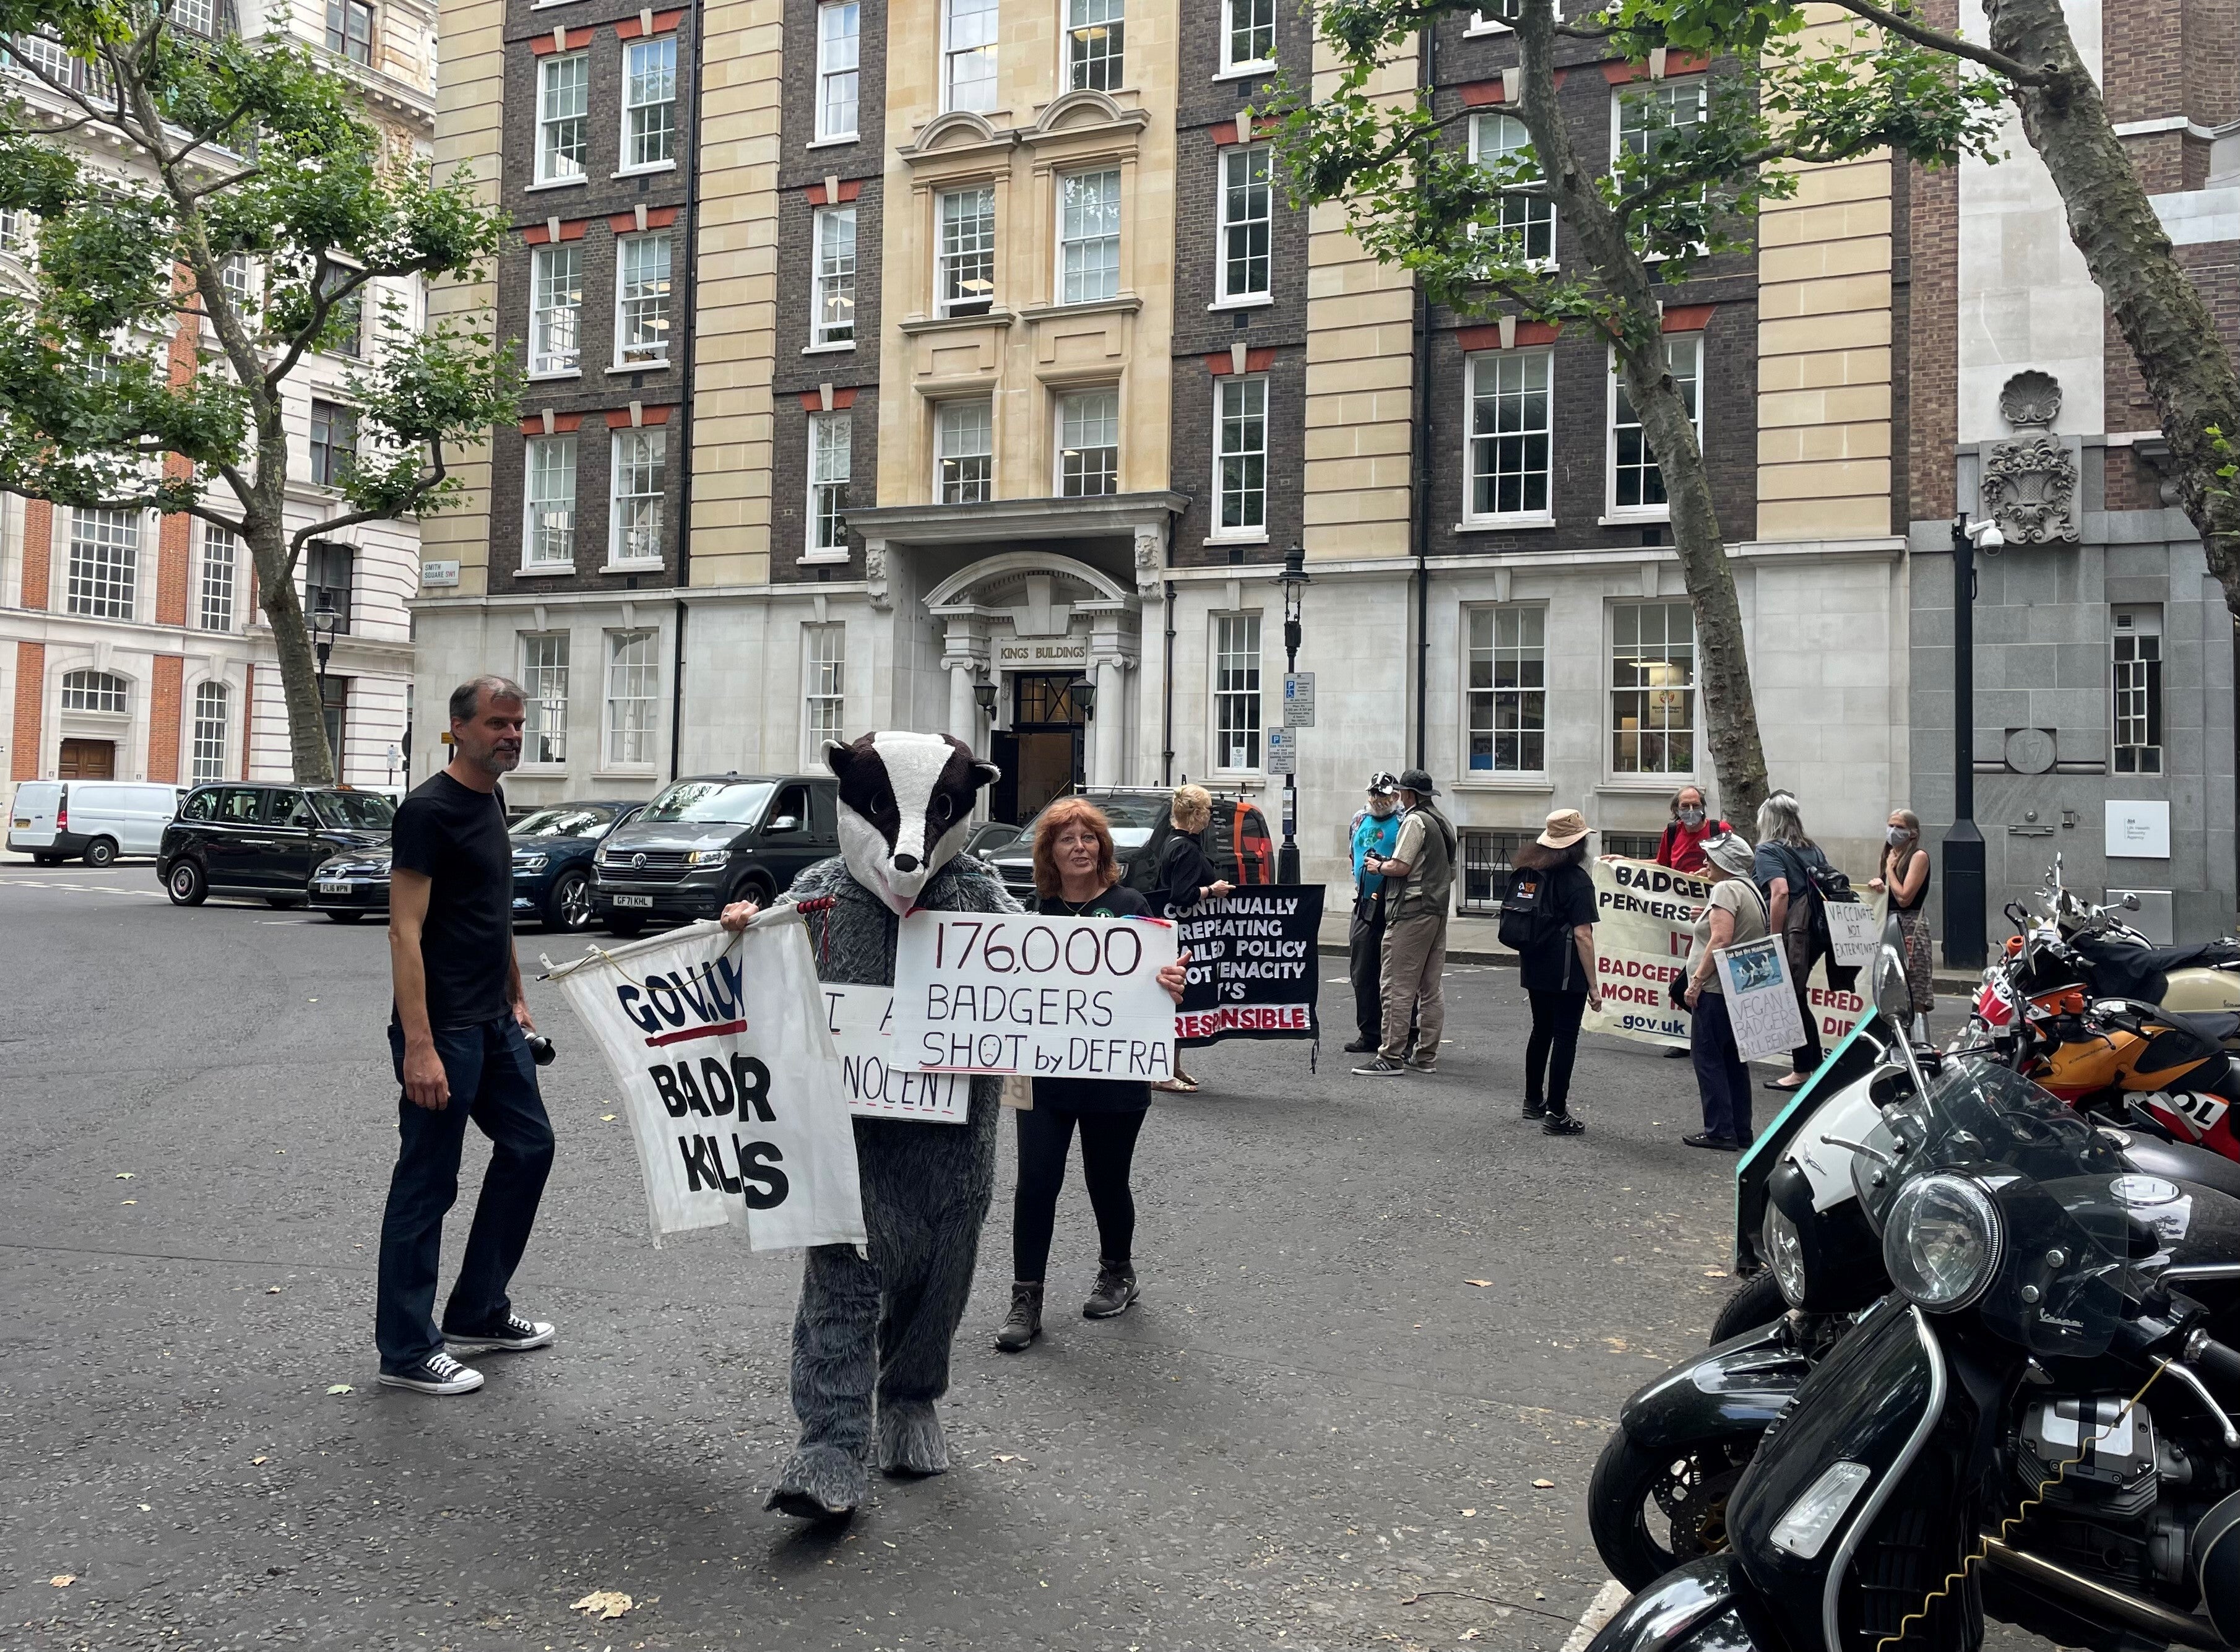 Badger cull protesters outside the Tory leadership hustings event (Sophie Wingate/PA)